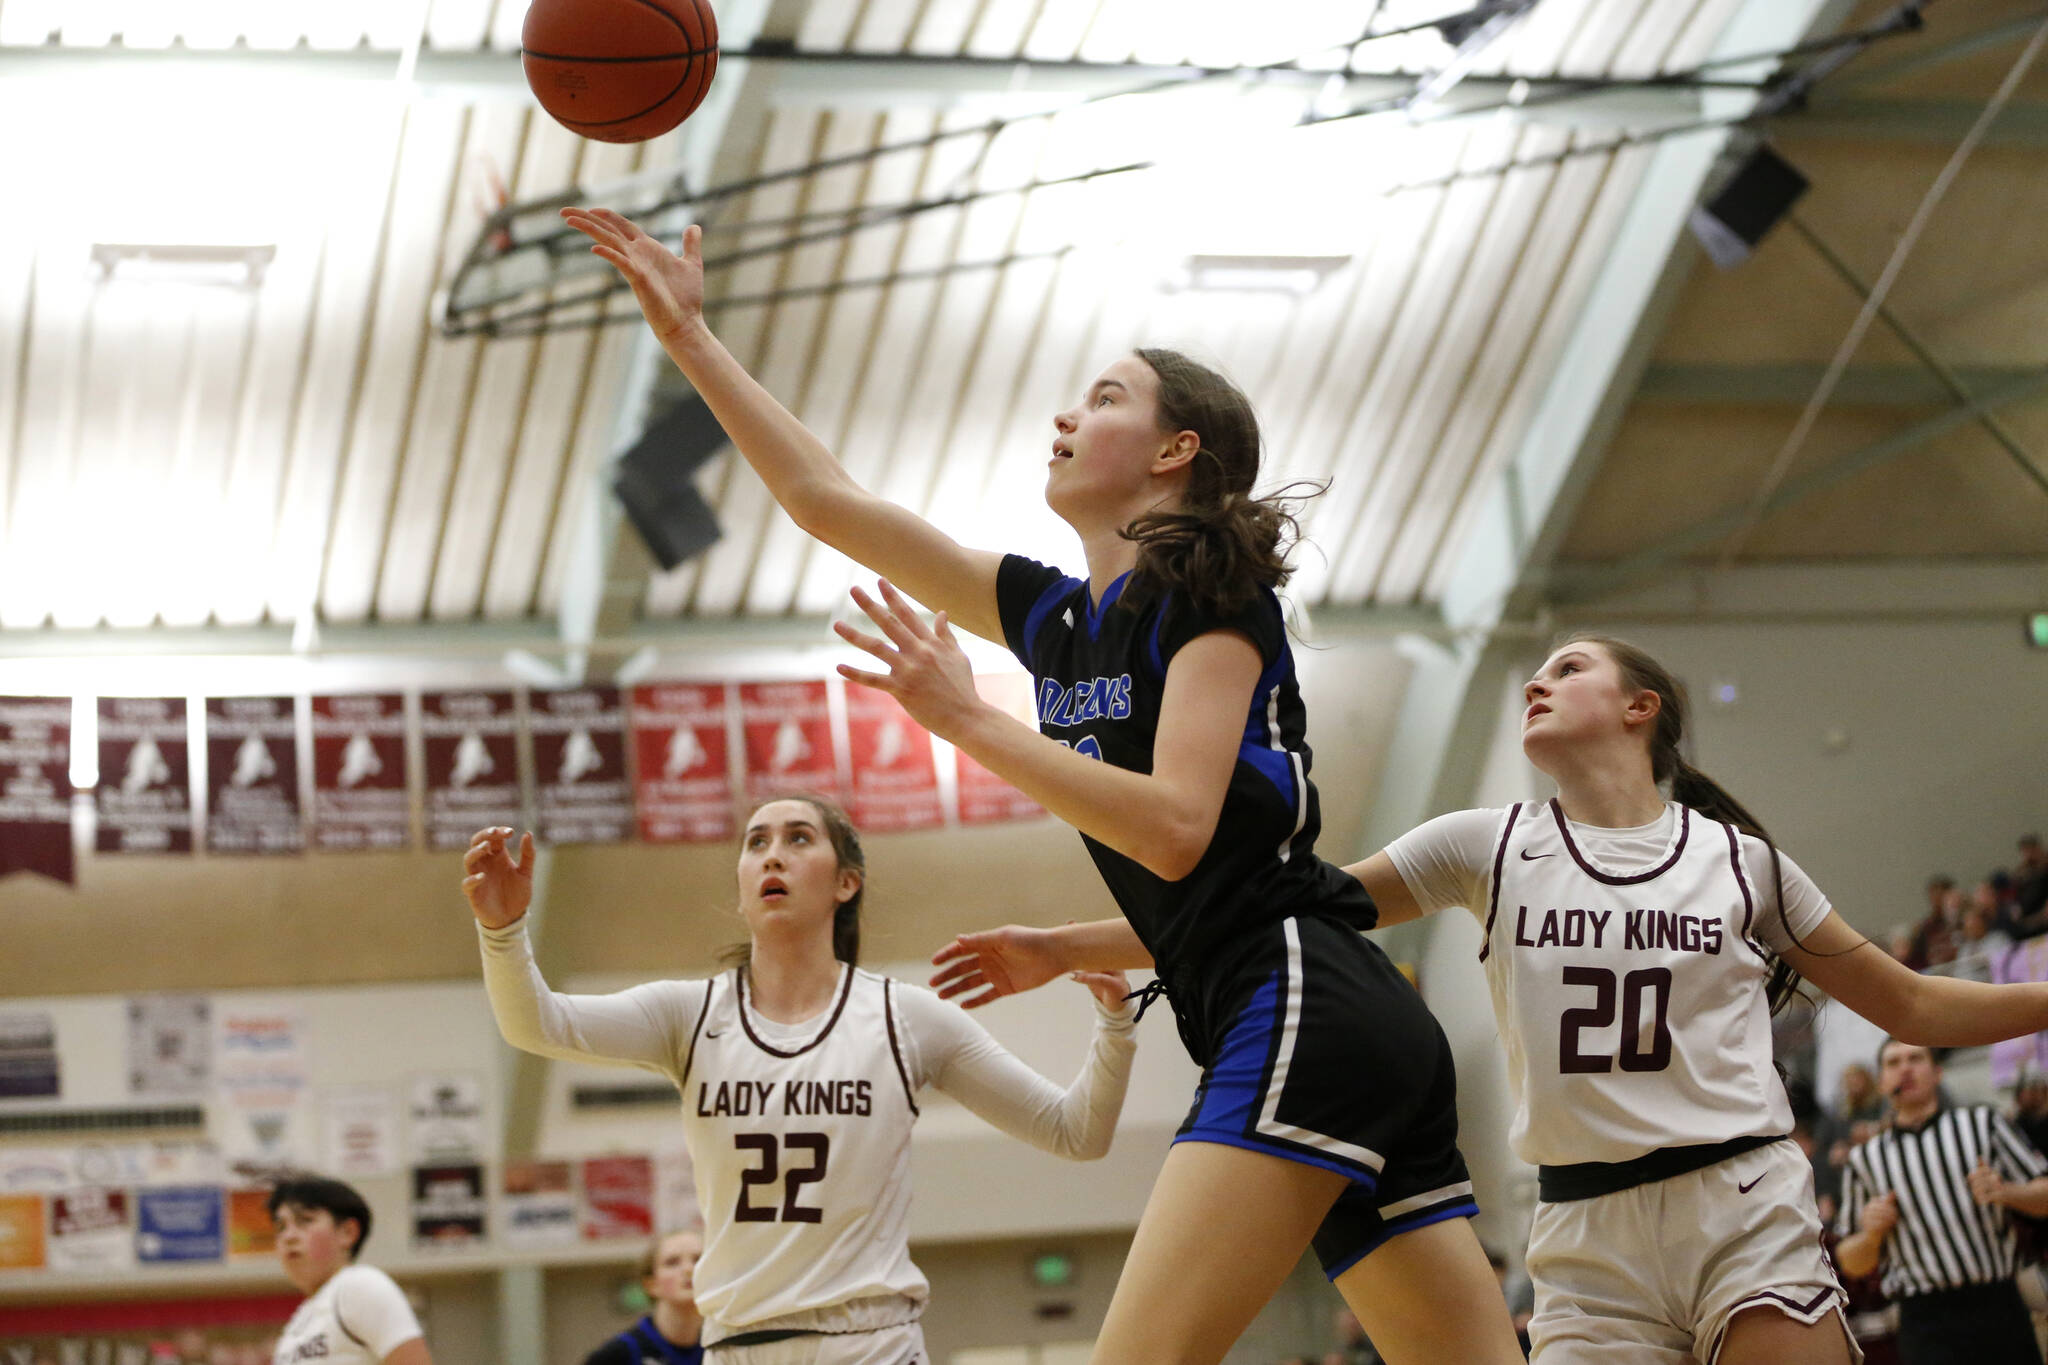 Thunder Mountain’s Cailynn Baxter (23) attempts a layup during Saturday’s game at Ketchikan High School, which Thunder Mountain won 60-38. (Christopher Mullen / Ketchikan Daily News)